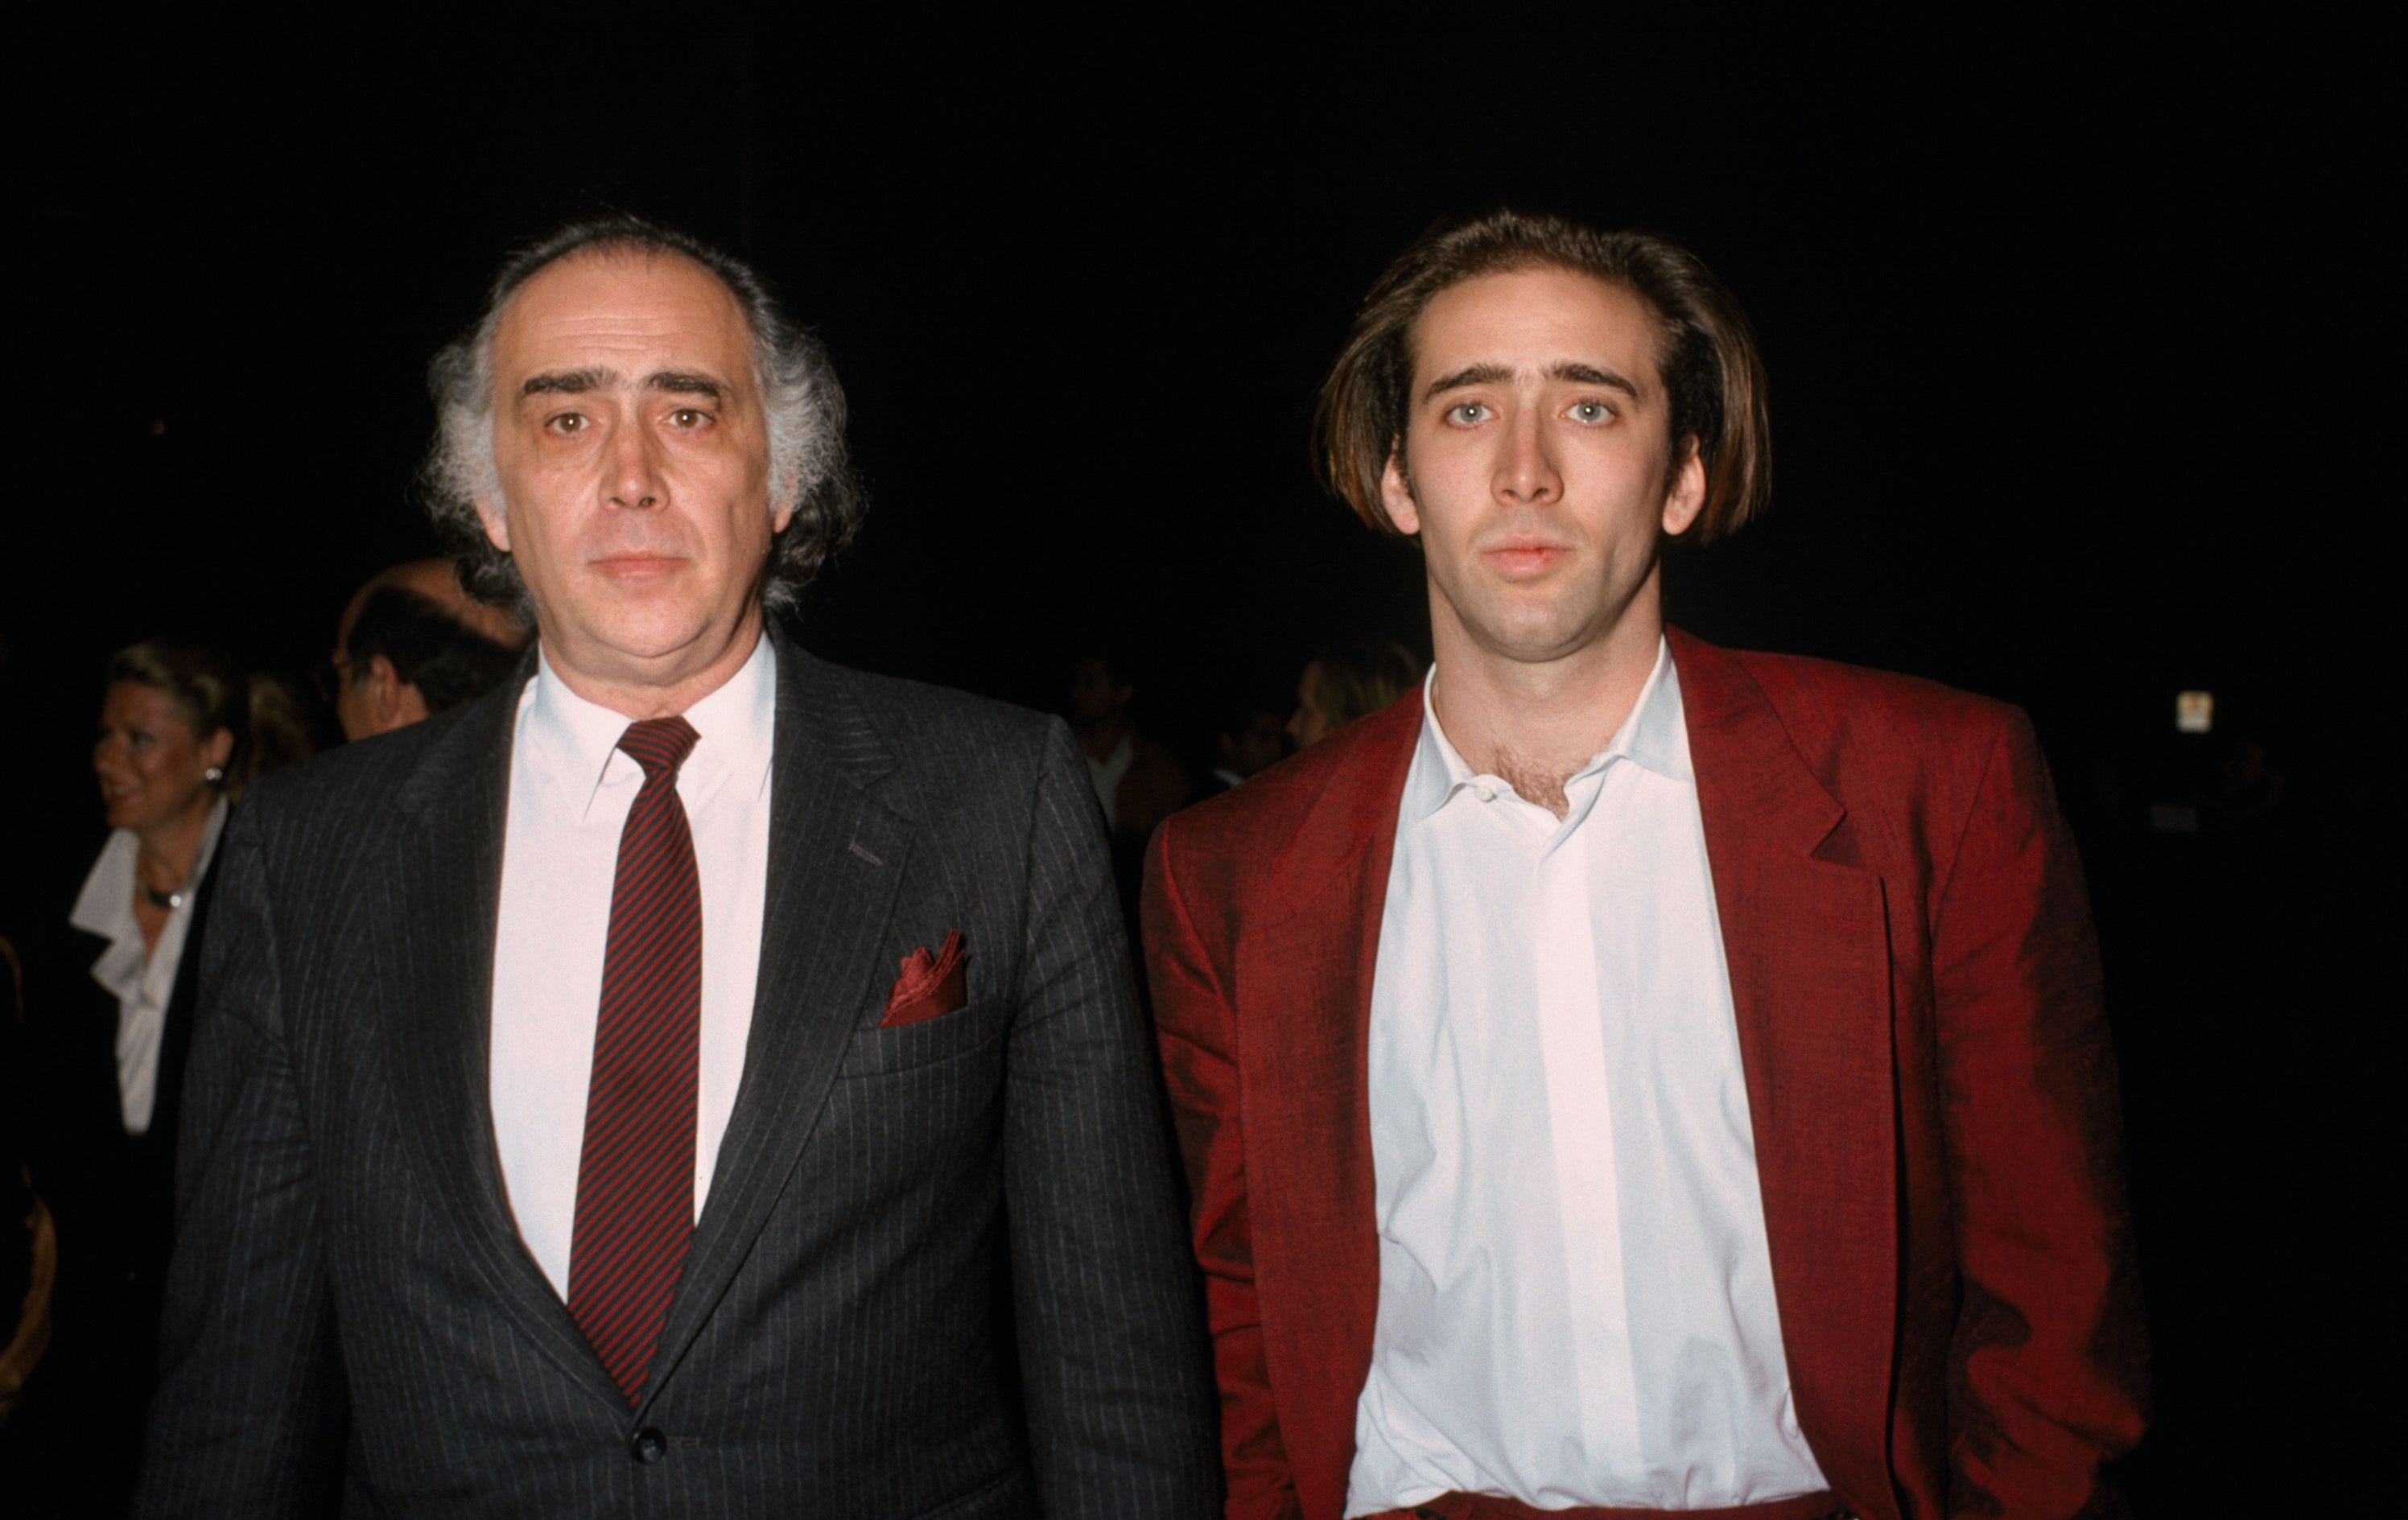 August and his son Nic Cage at the moonstruck premiere